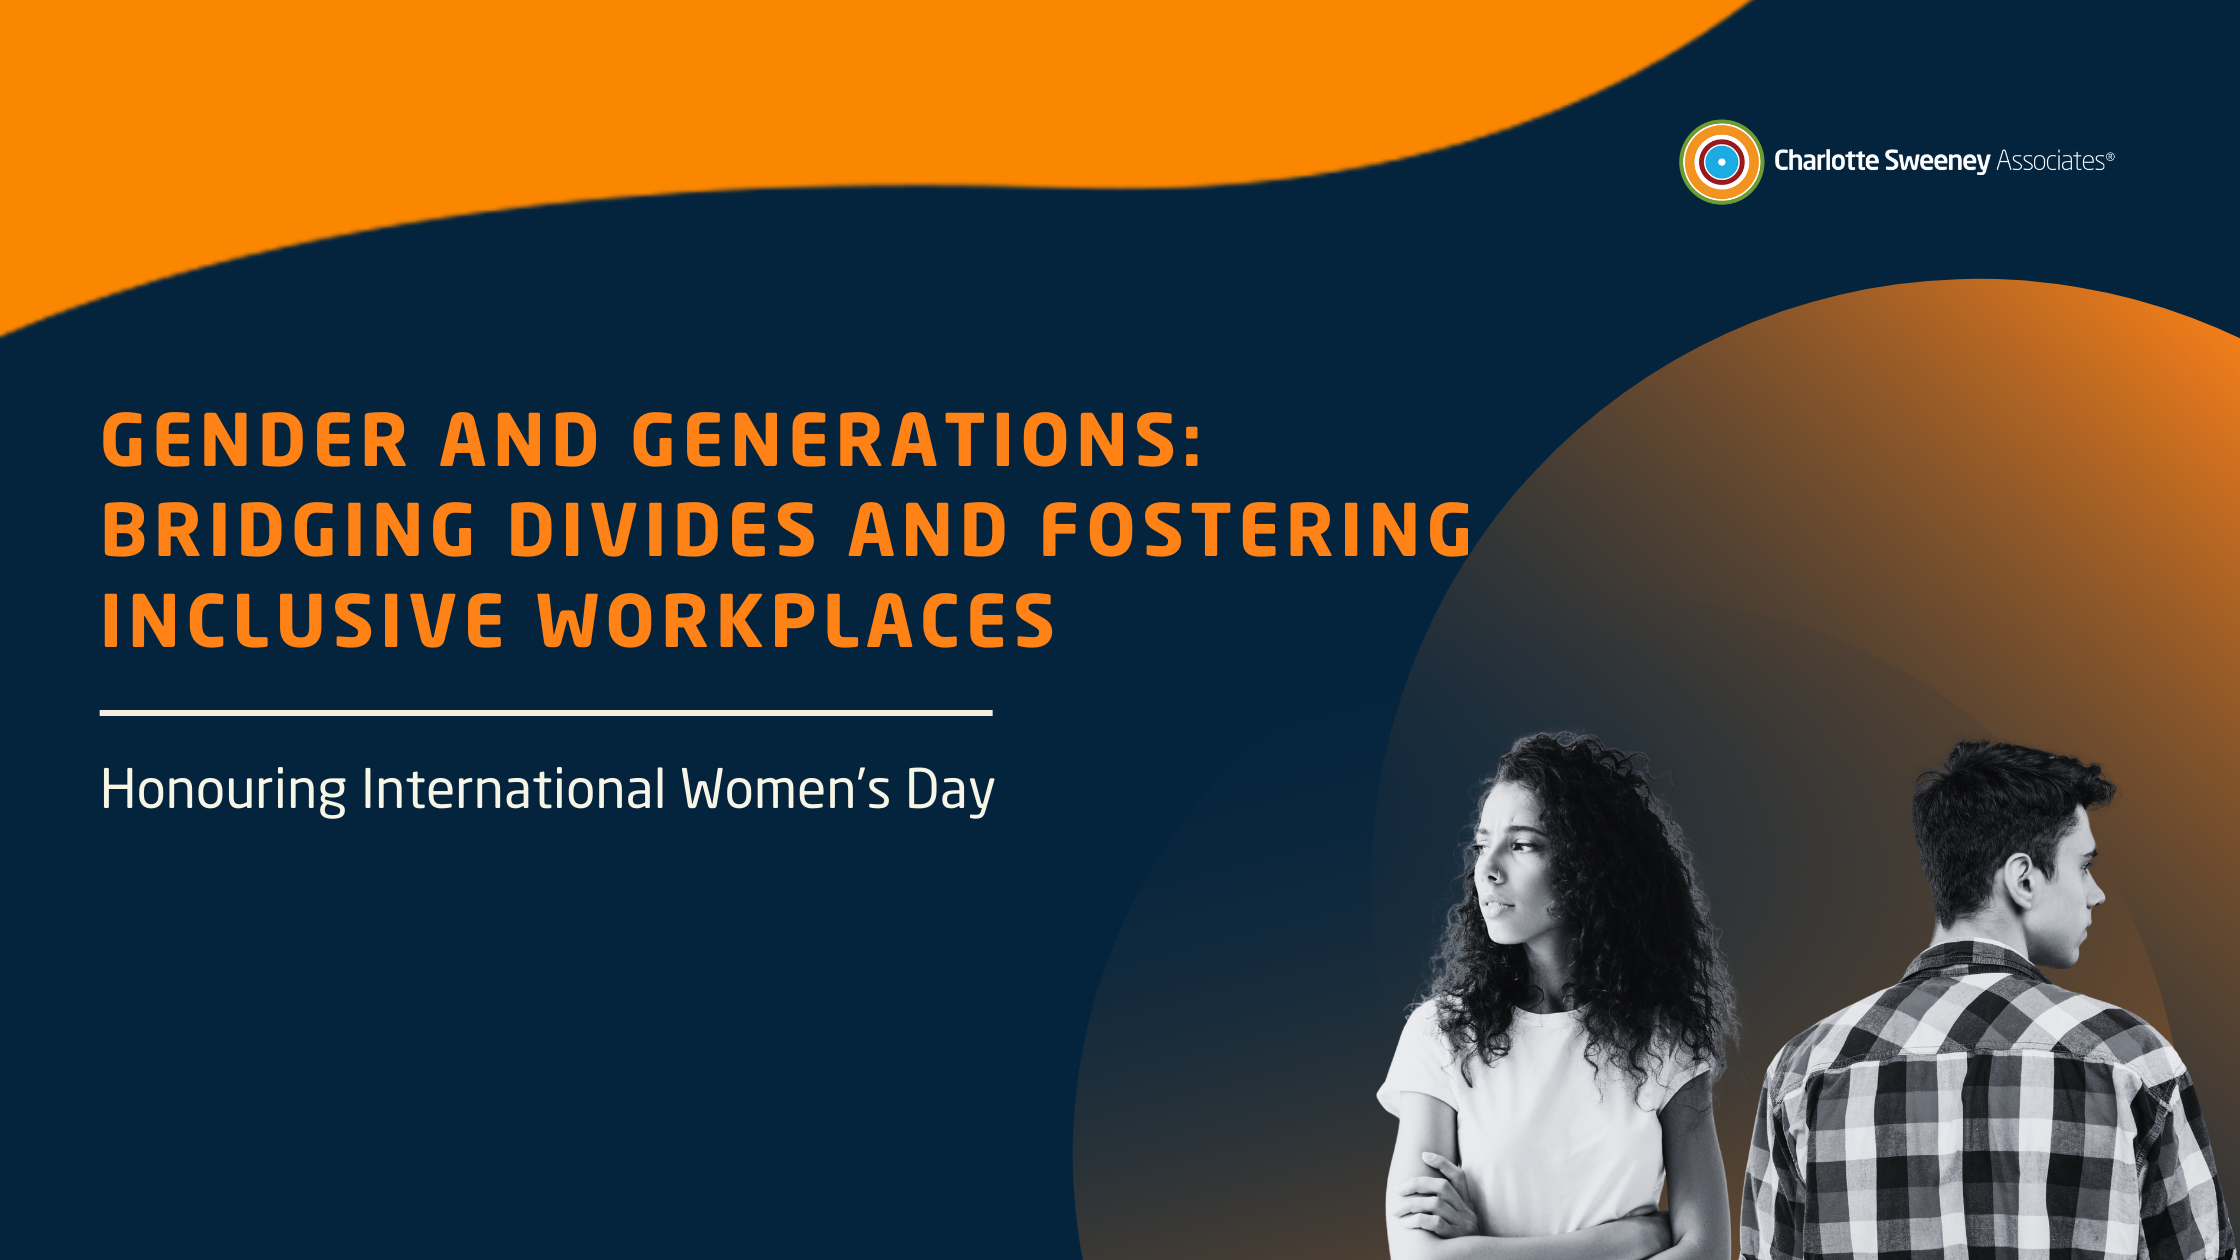 Gender and Generations: Bridging Divides and Fostering Inclusive Workplaces